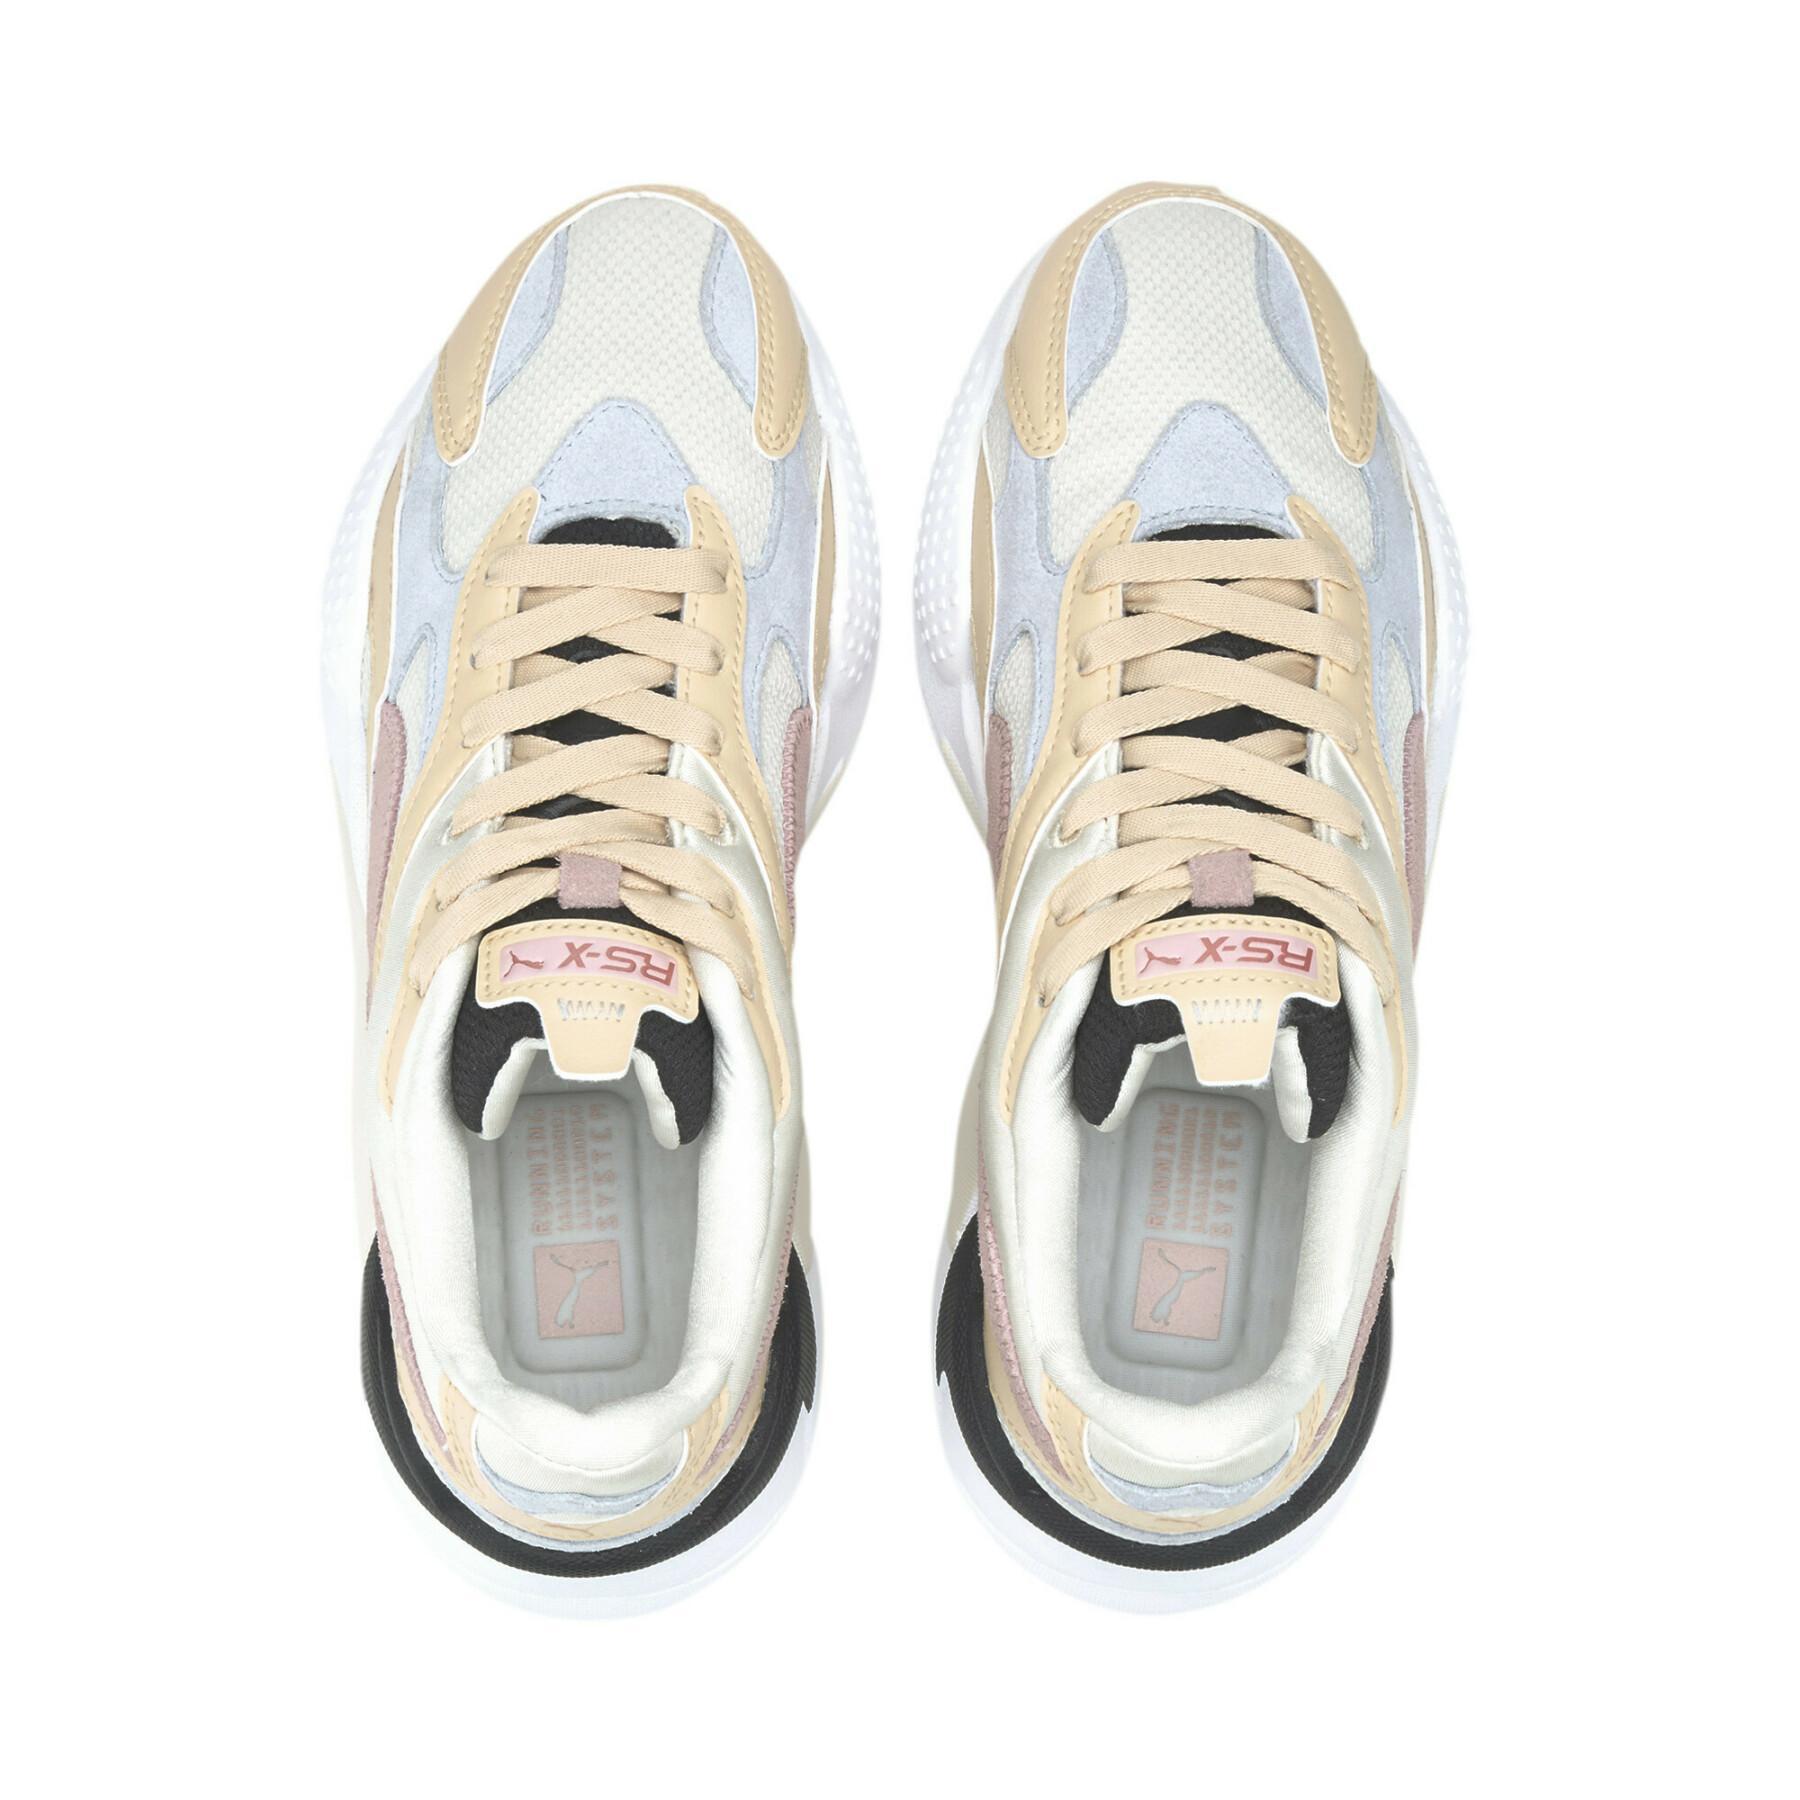 Women's shoes Puma RS-X³ Layers